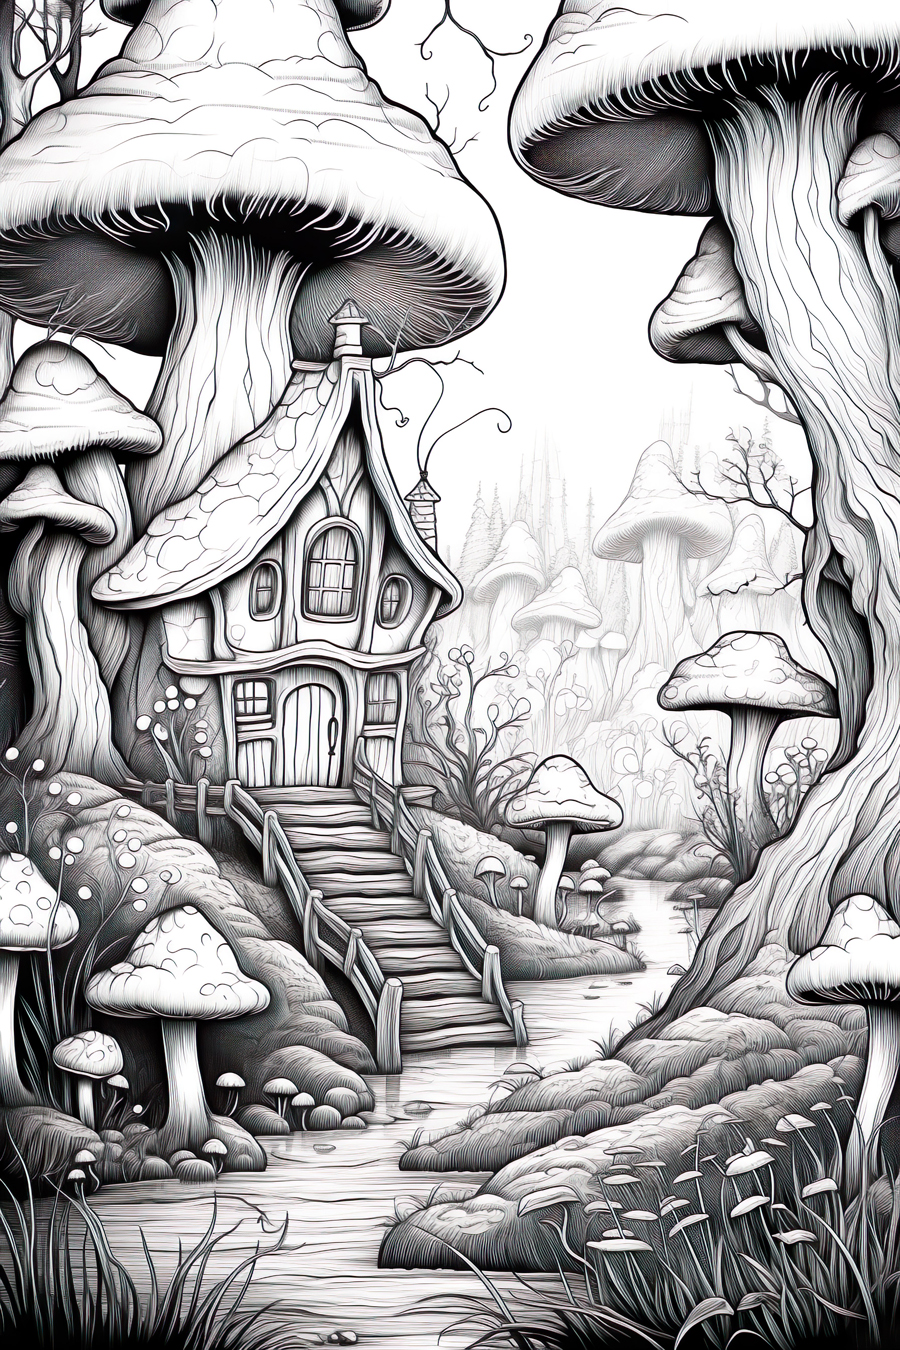 A black and white drawing of a house with mushrooms.